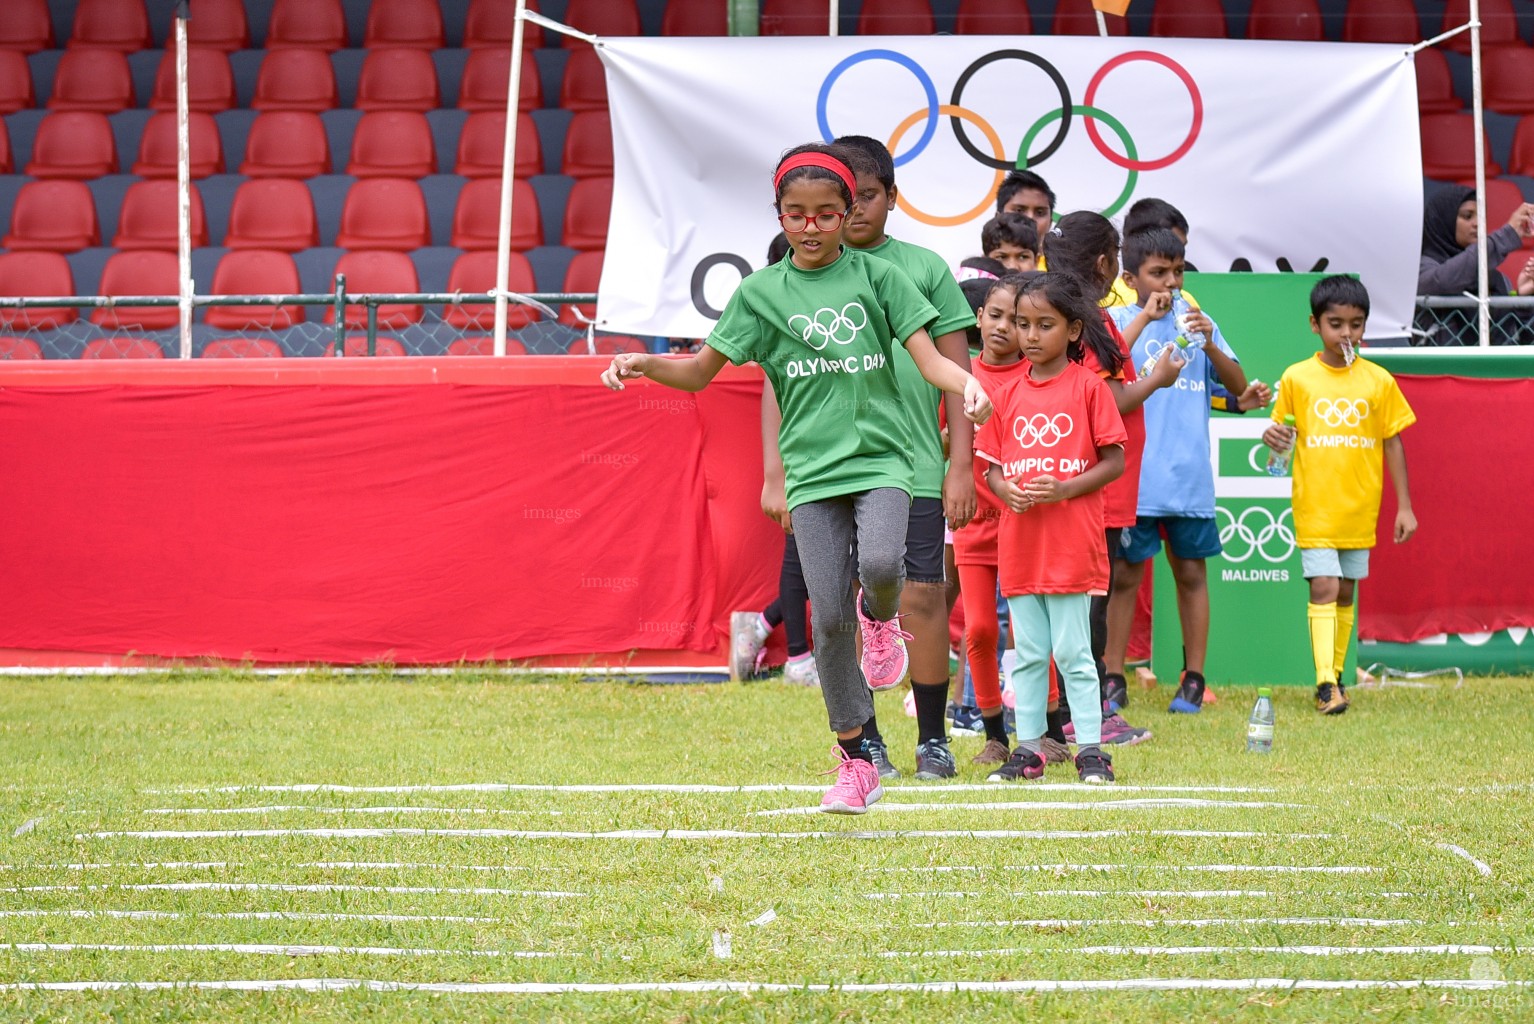 Olympic Day Activities 2018